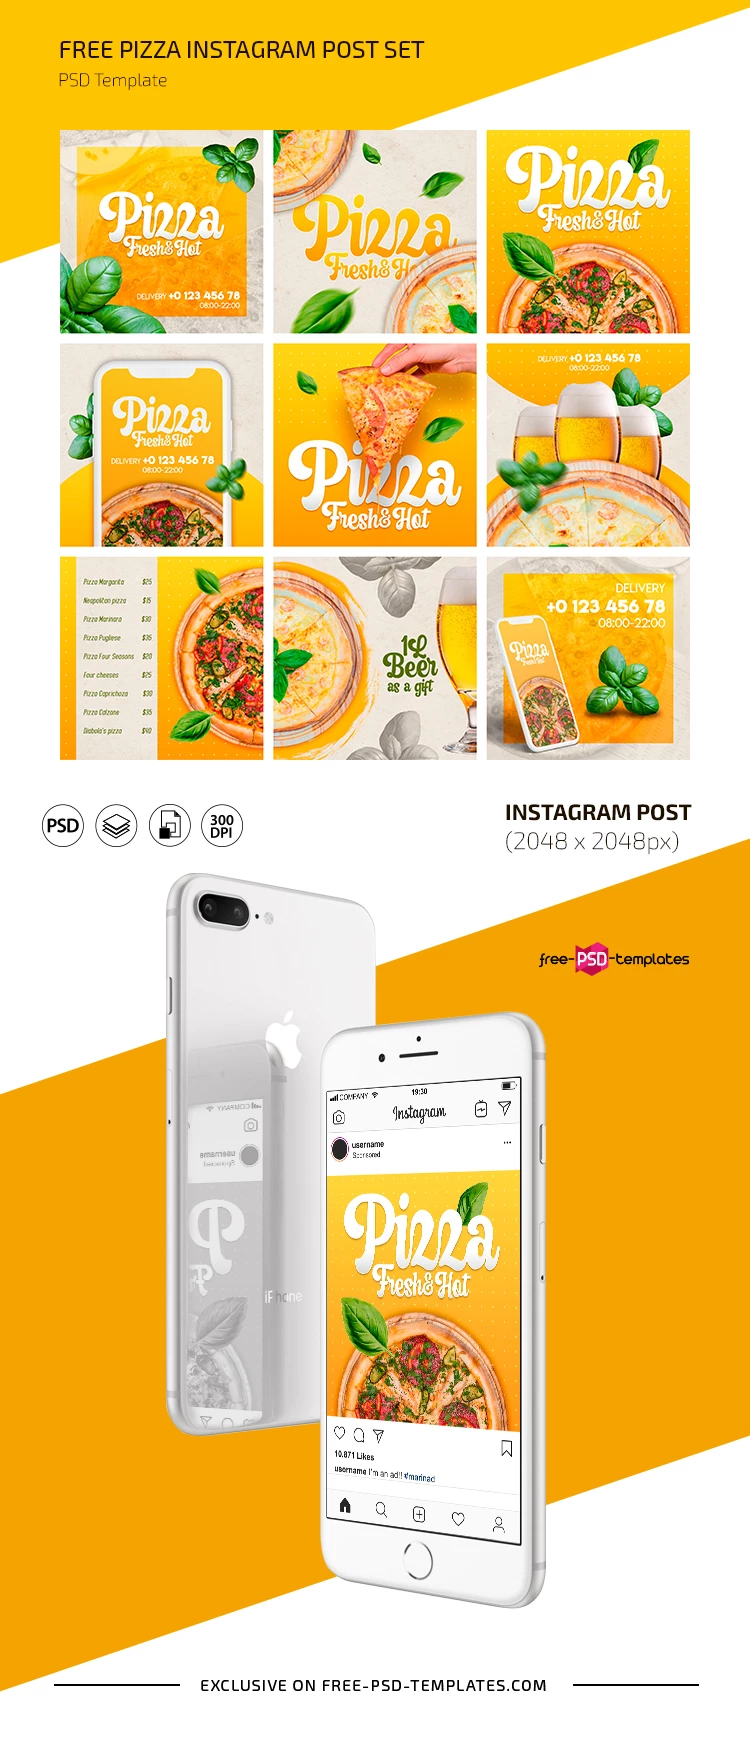 Free Pizza Instagram Posts Set in PSD